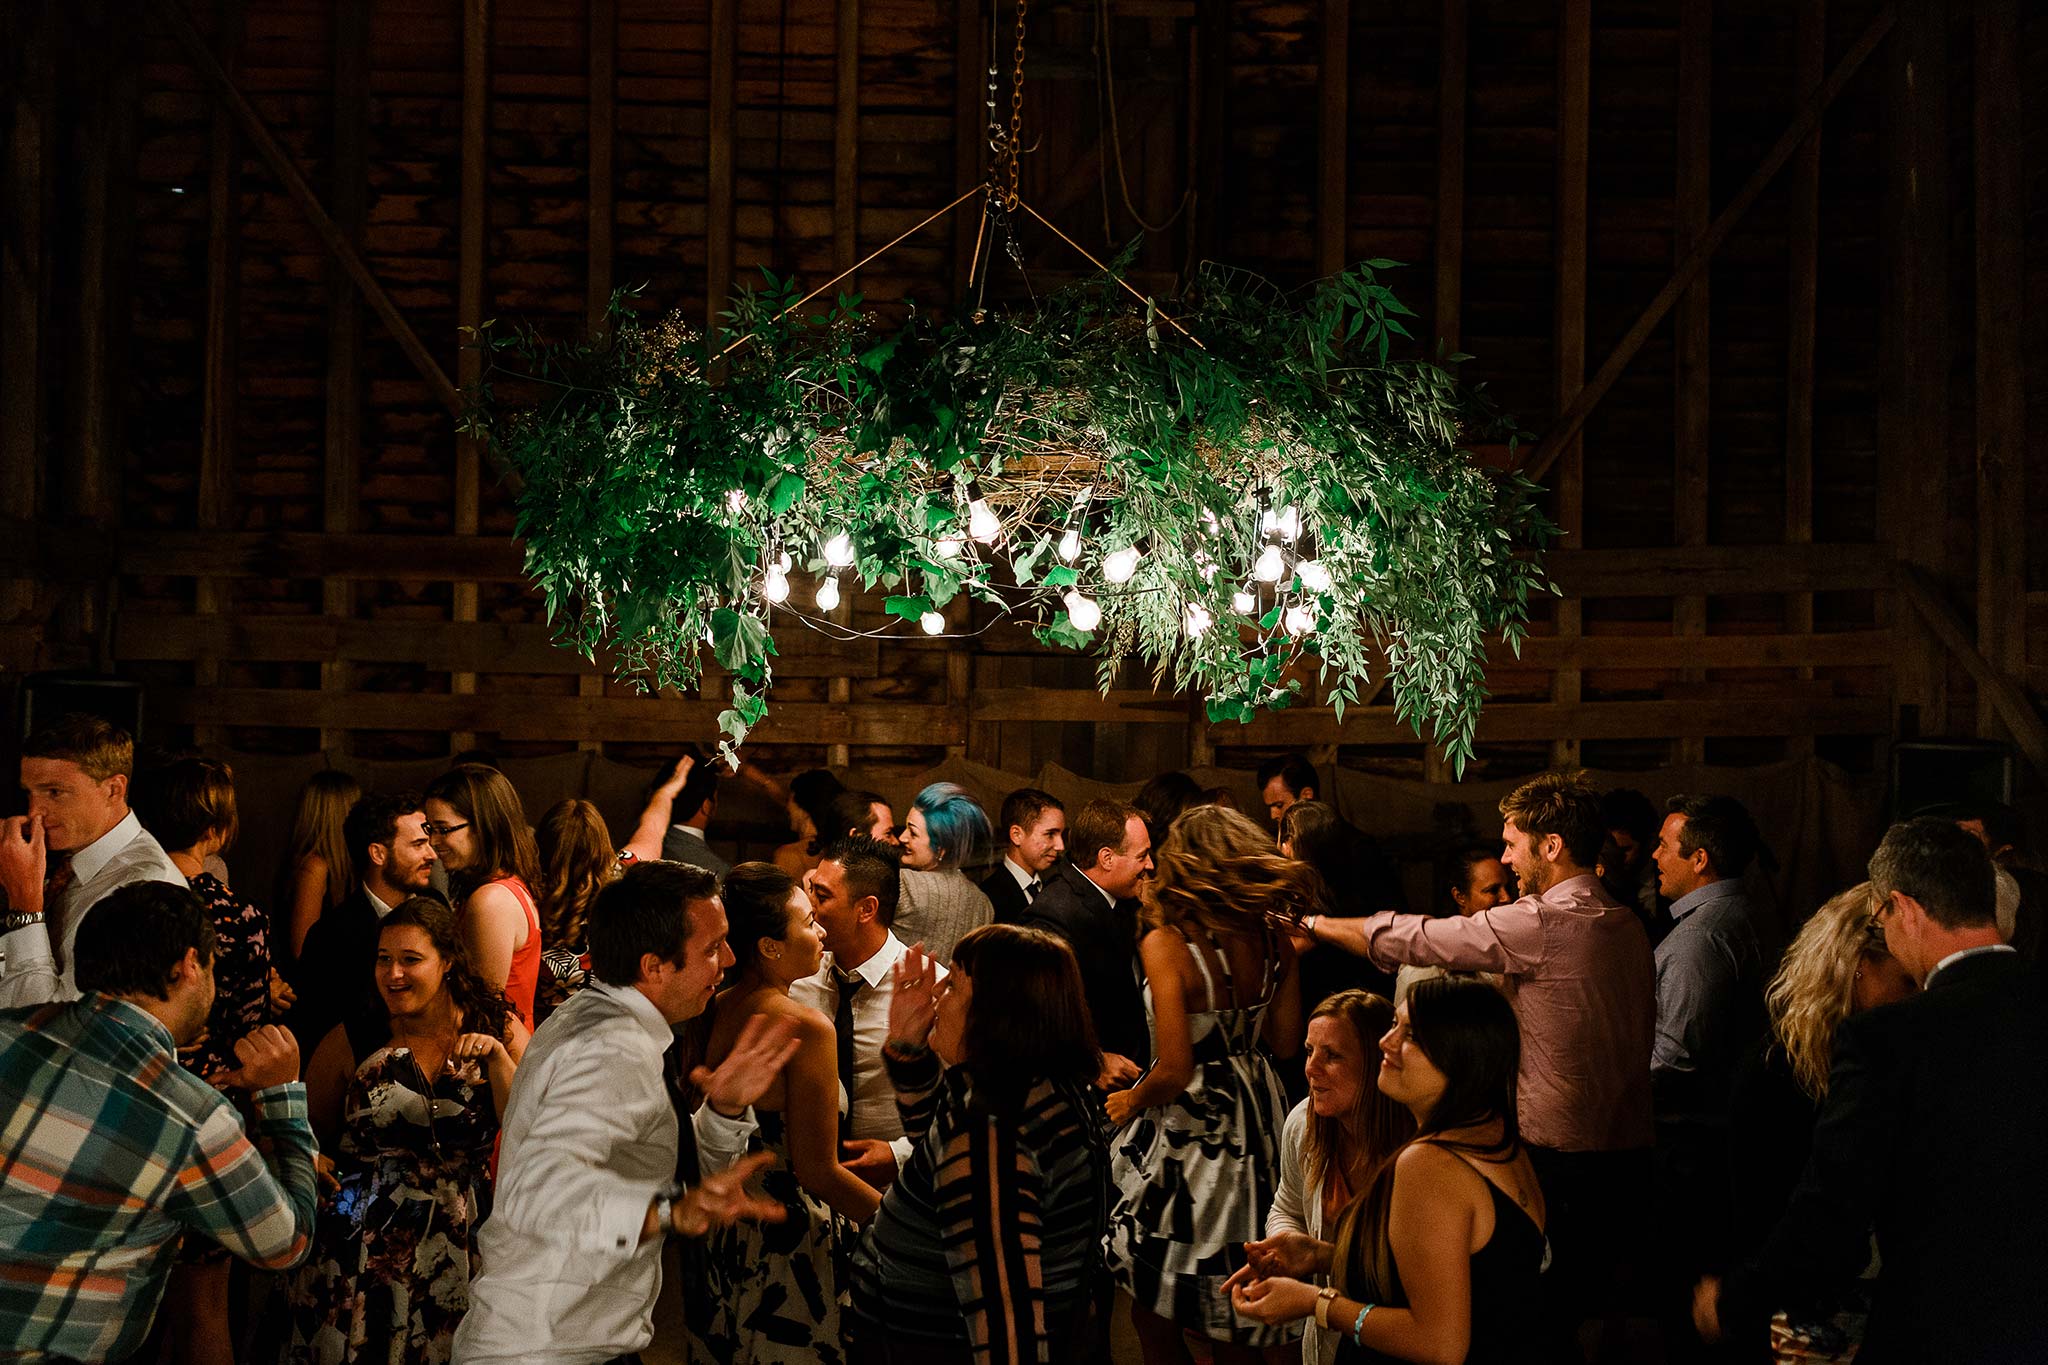  Dancing the night away under the custom made foliage chandelier 